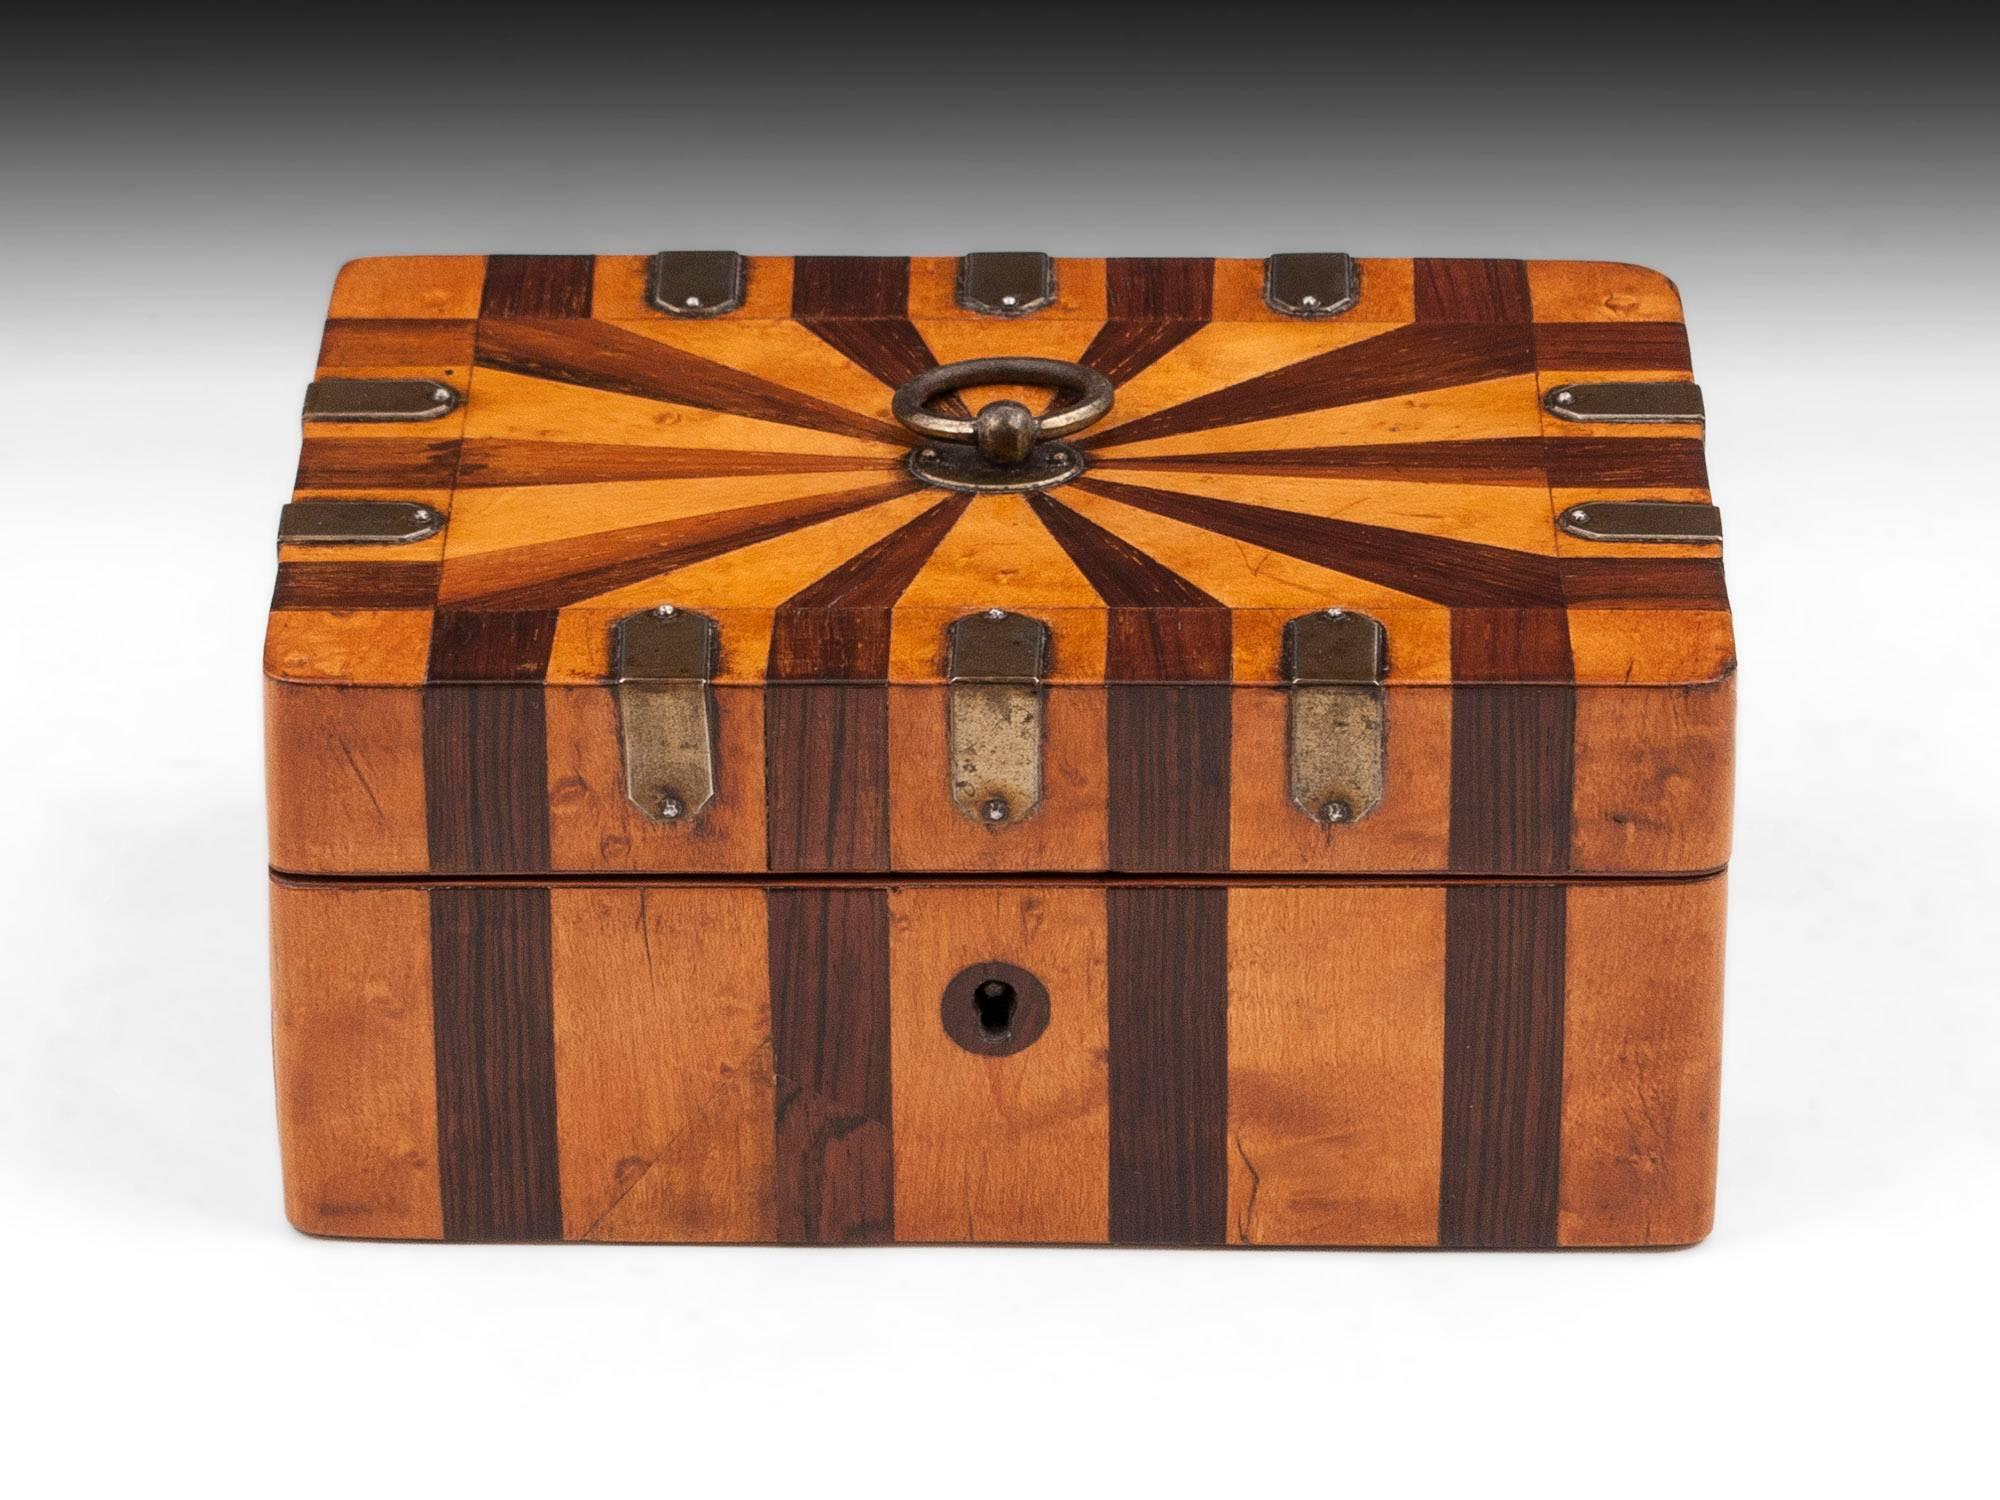 Palais Royal sewing box with mahogany and maple striped design with cut steel corner brackets and sturdy ring handle. 

The interior of this palais royal sewing box features a padded removable tool tray fitted with Various gilt tools including a